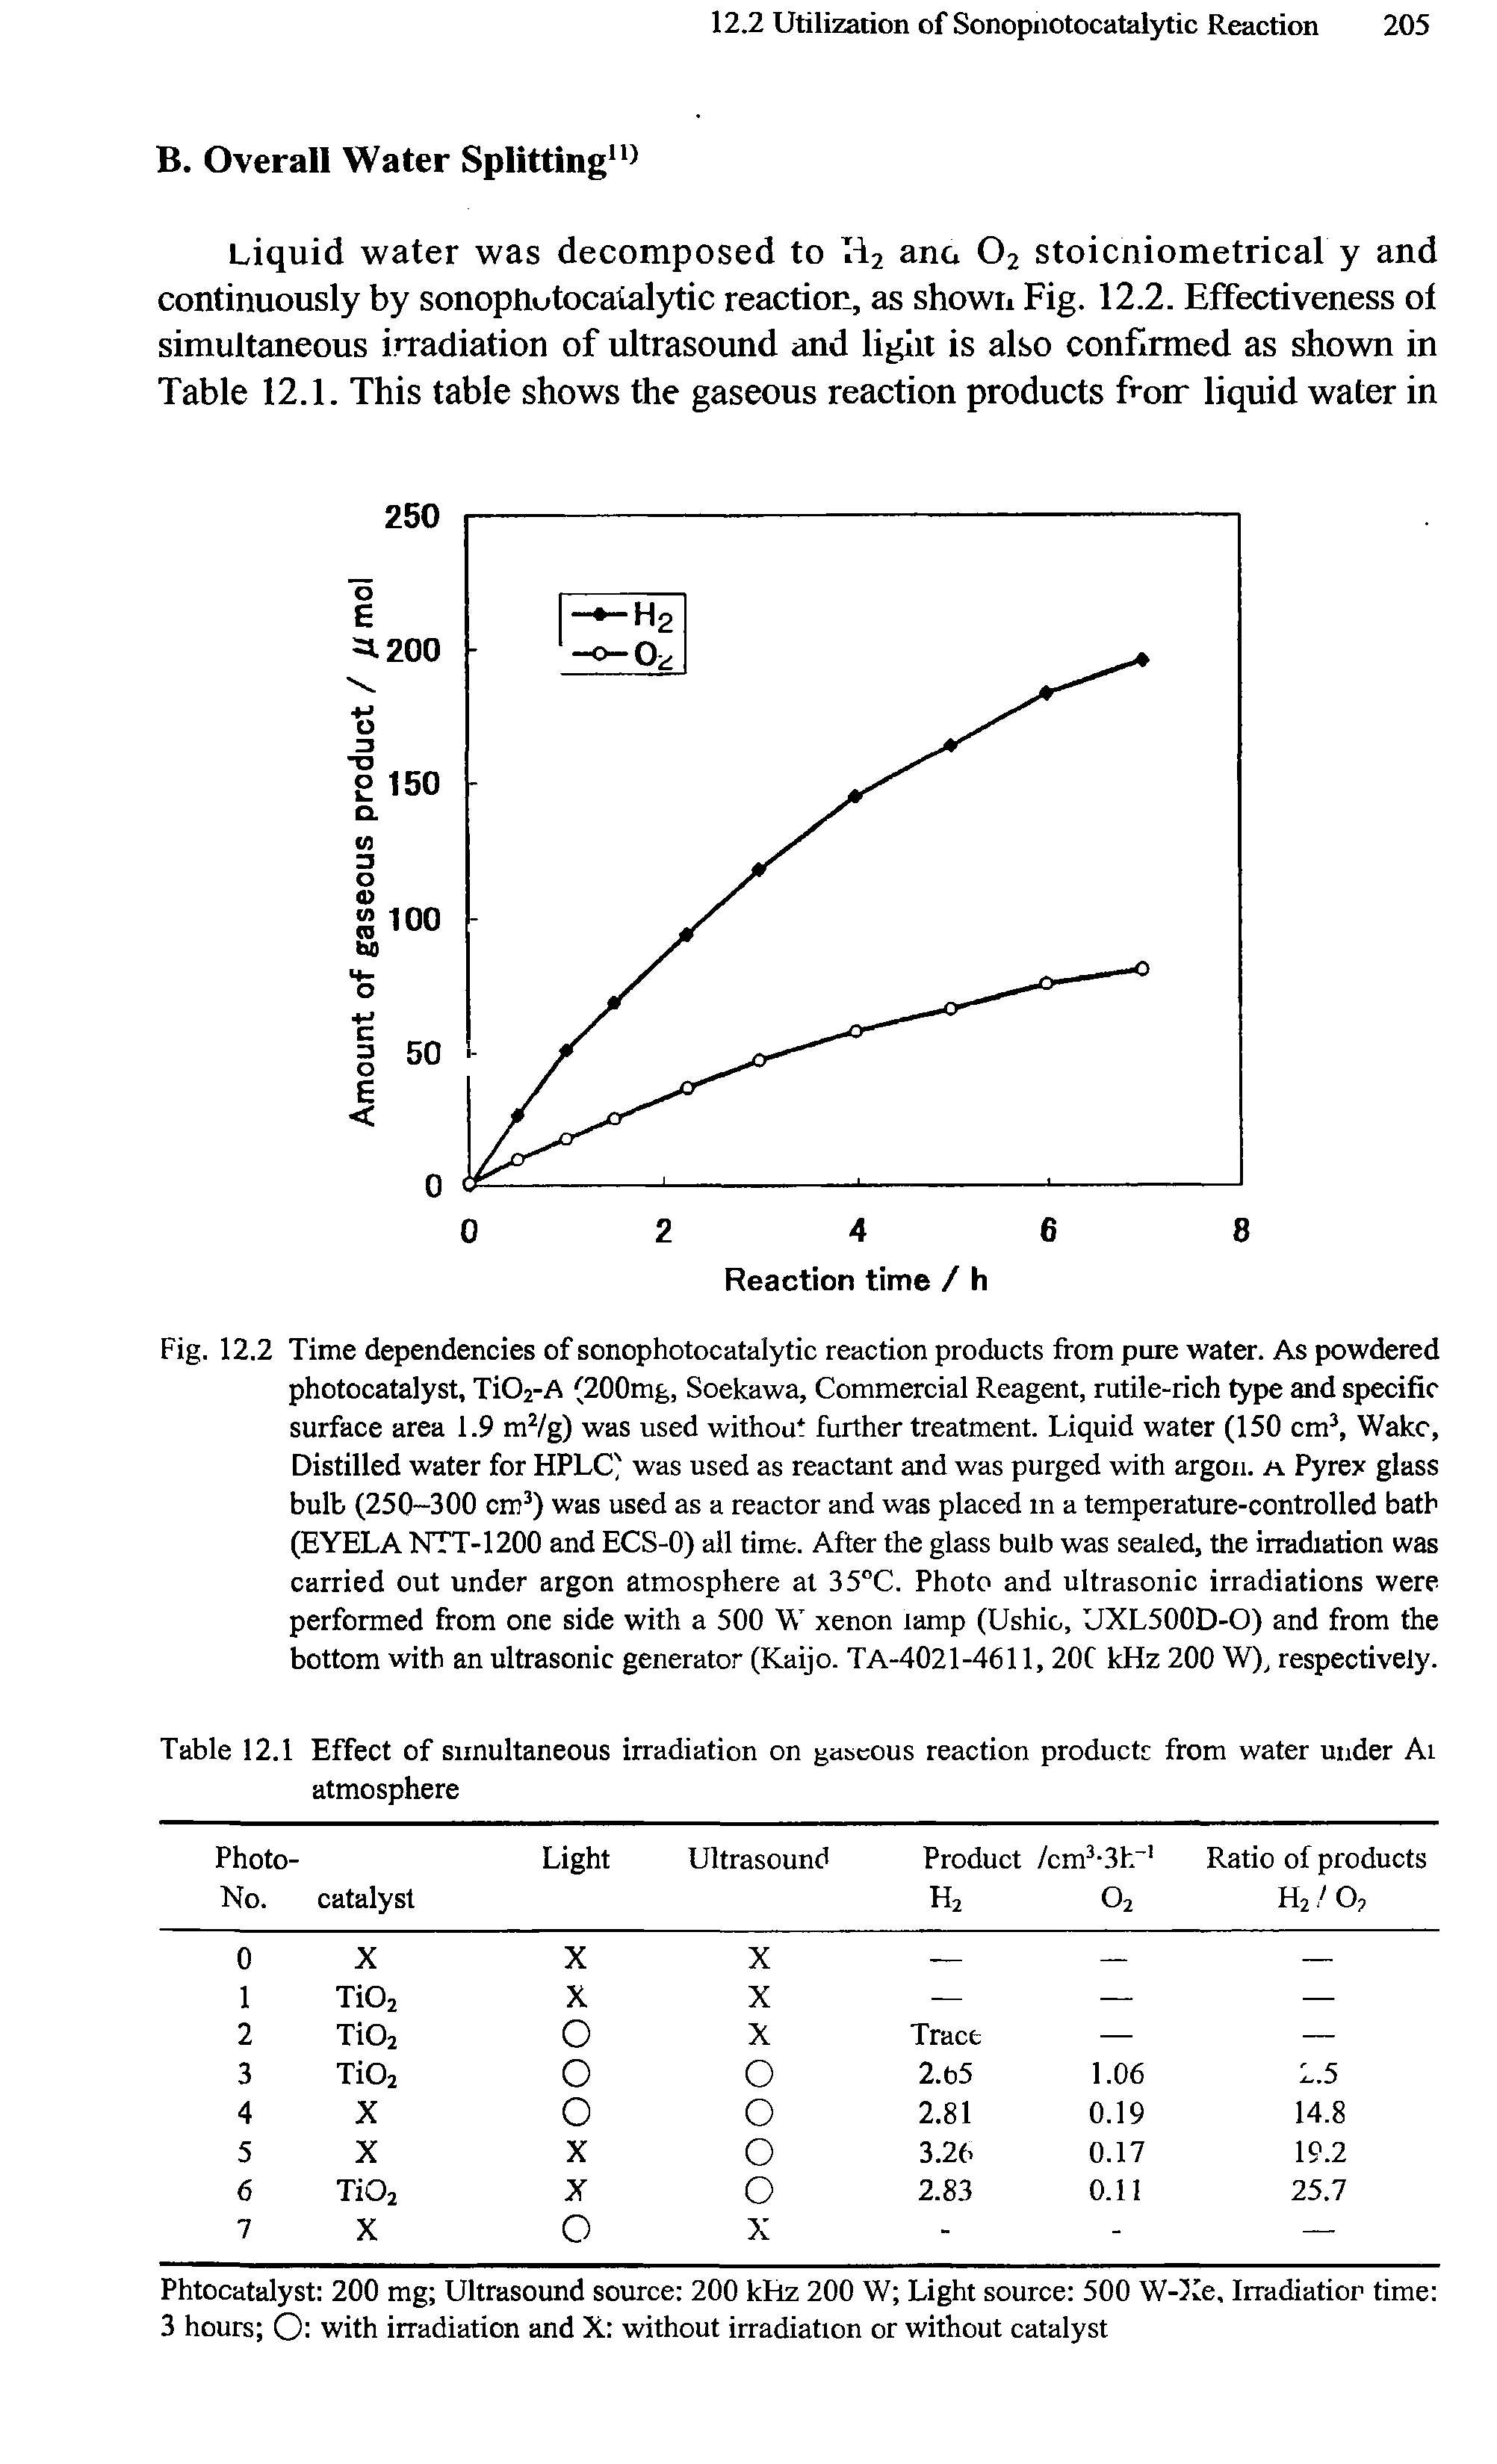 Fig. 12.2 Time dependencies of sonophotocatalytic reaction products from pure water. As powdered photocatalyst, Ti02-A (200mg, Soekawa, Commercial Reagent, rutile-rich type and specific surface area 1.9 m2/g) was used without further treatment. Liquid water (150 cm3, Wake, Distilled water for HPLC was used as reactant and was purged with argon, a Pyrex glass bulb (250-300 cm3) was used as a reactor and was placed m a temperature-controlled bath (EYELA NTT-1200 and ECS-0) all time. After the glass bulb was sealed, the irradiation was carried out under argon atmosphere at 35°C. Photo and ultrasonic irradiations were performed from one side with a 500 W xenon lamp (Ushio, UXL500D-O) and from the bottom with an ultrasonic generator (Kaijo. TA-4021-4611, 20C kHz 200 W), respectively.